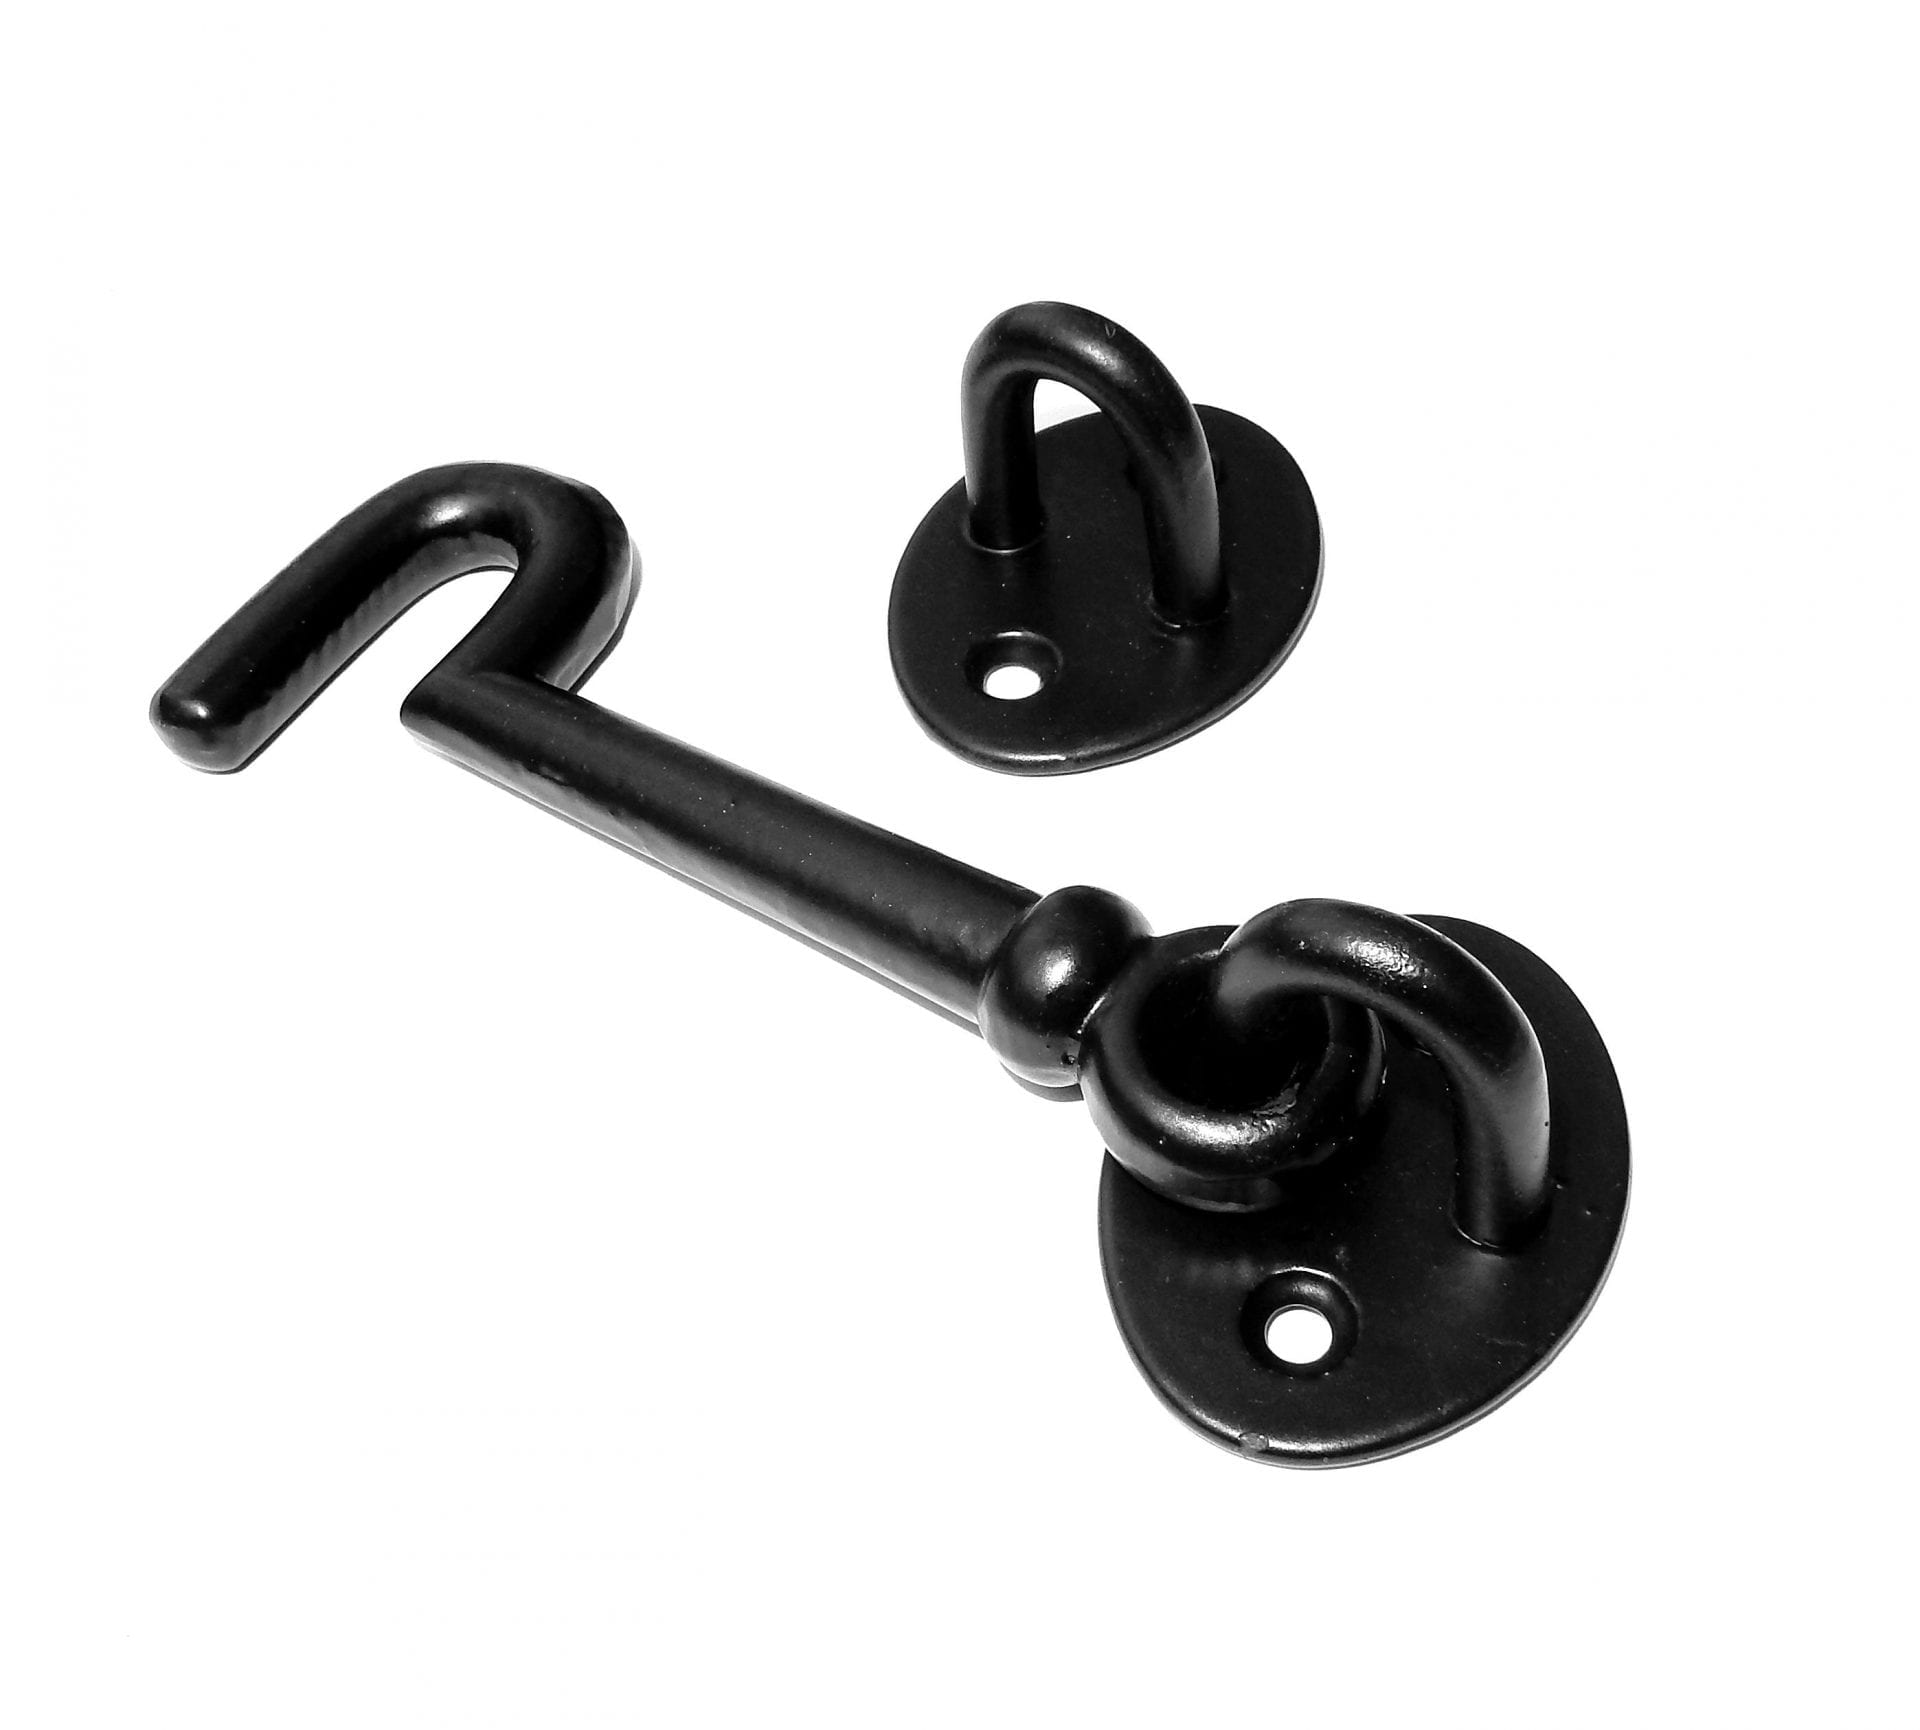 https://riccasarchitectural.com/wp-content/uploads/2013/06/4-inch-cast-iron-hook-and-eye-round-back.jpg